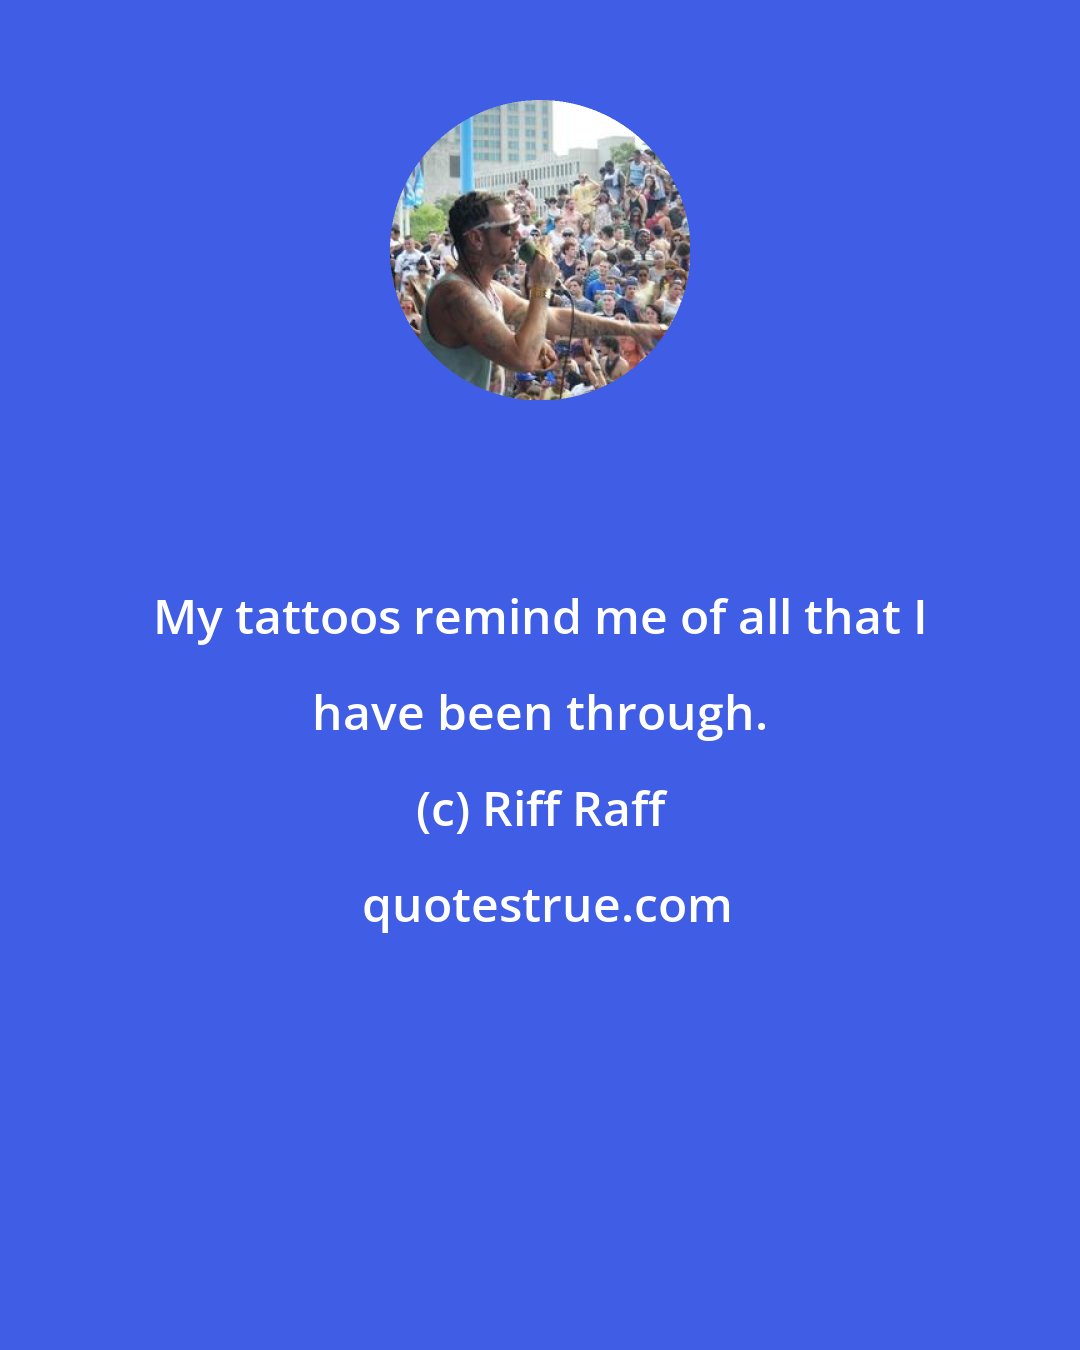 Riff Raff: My tattoos remind me of all that I have been through.